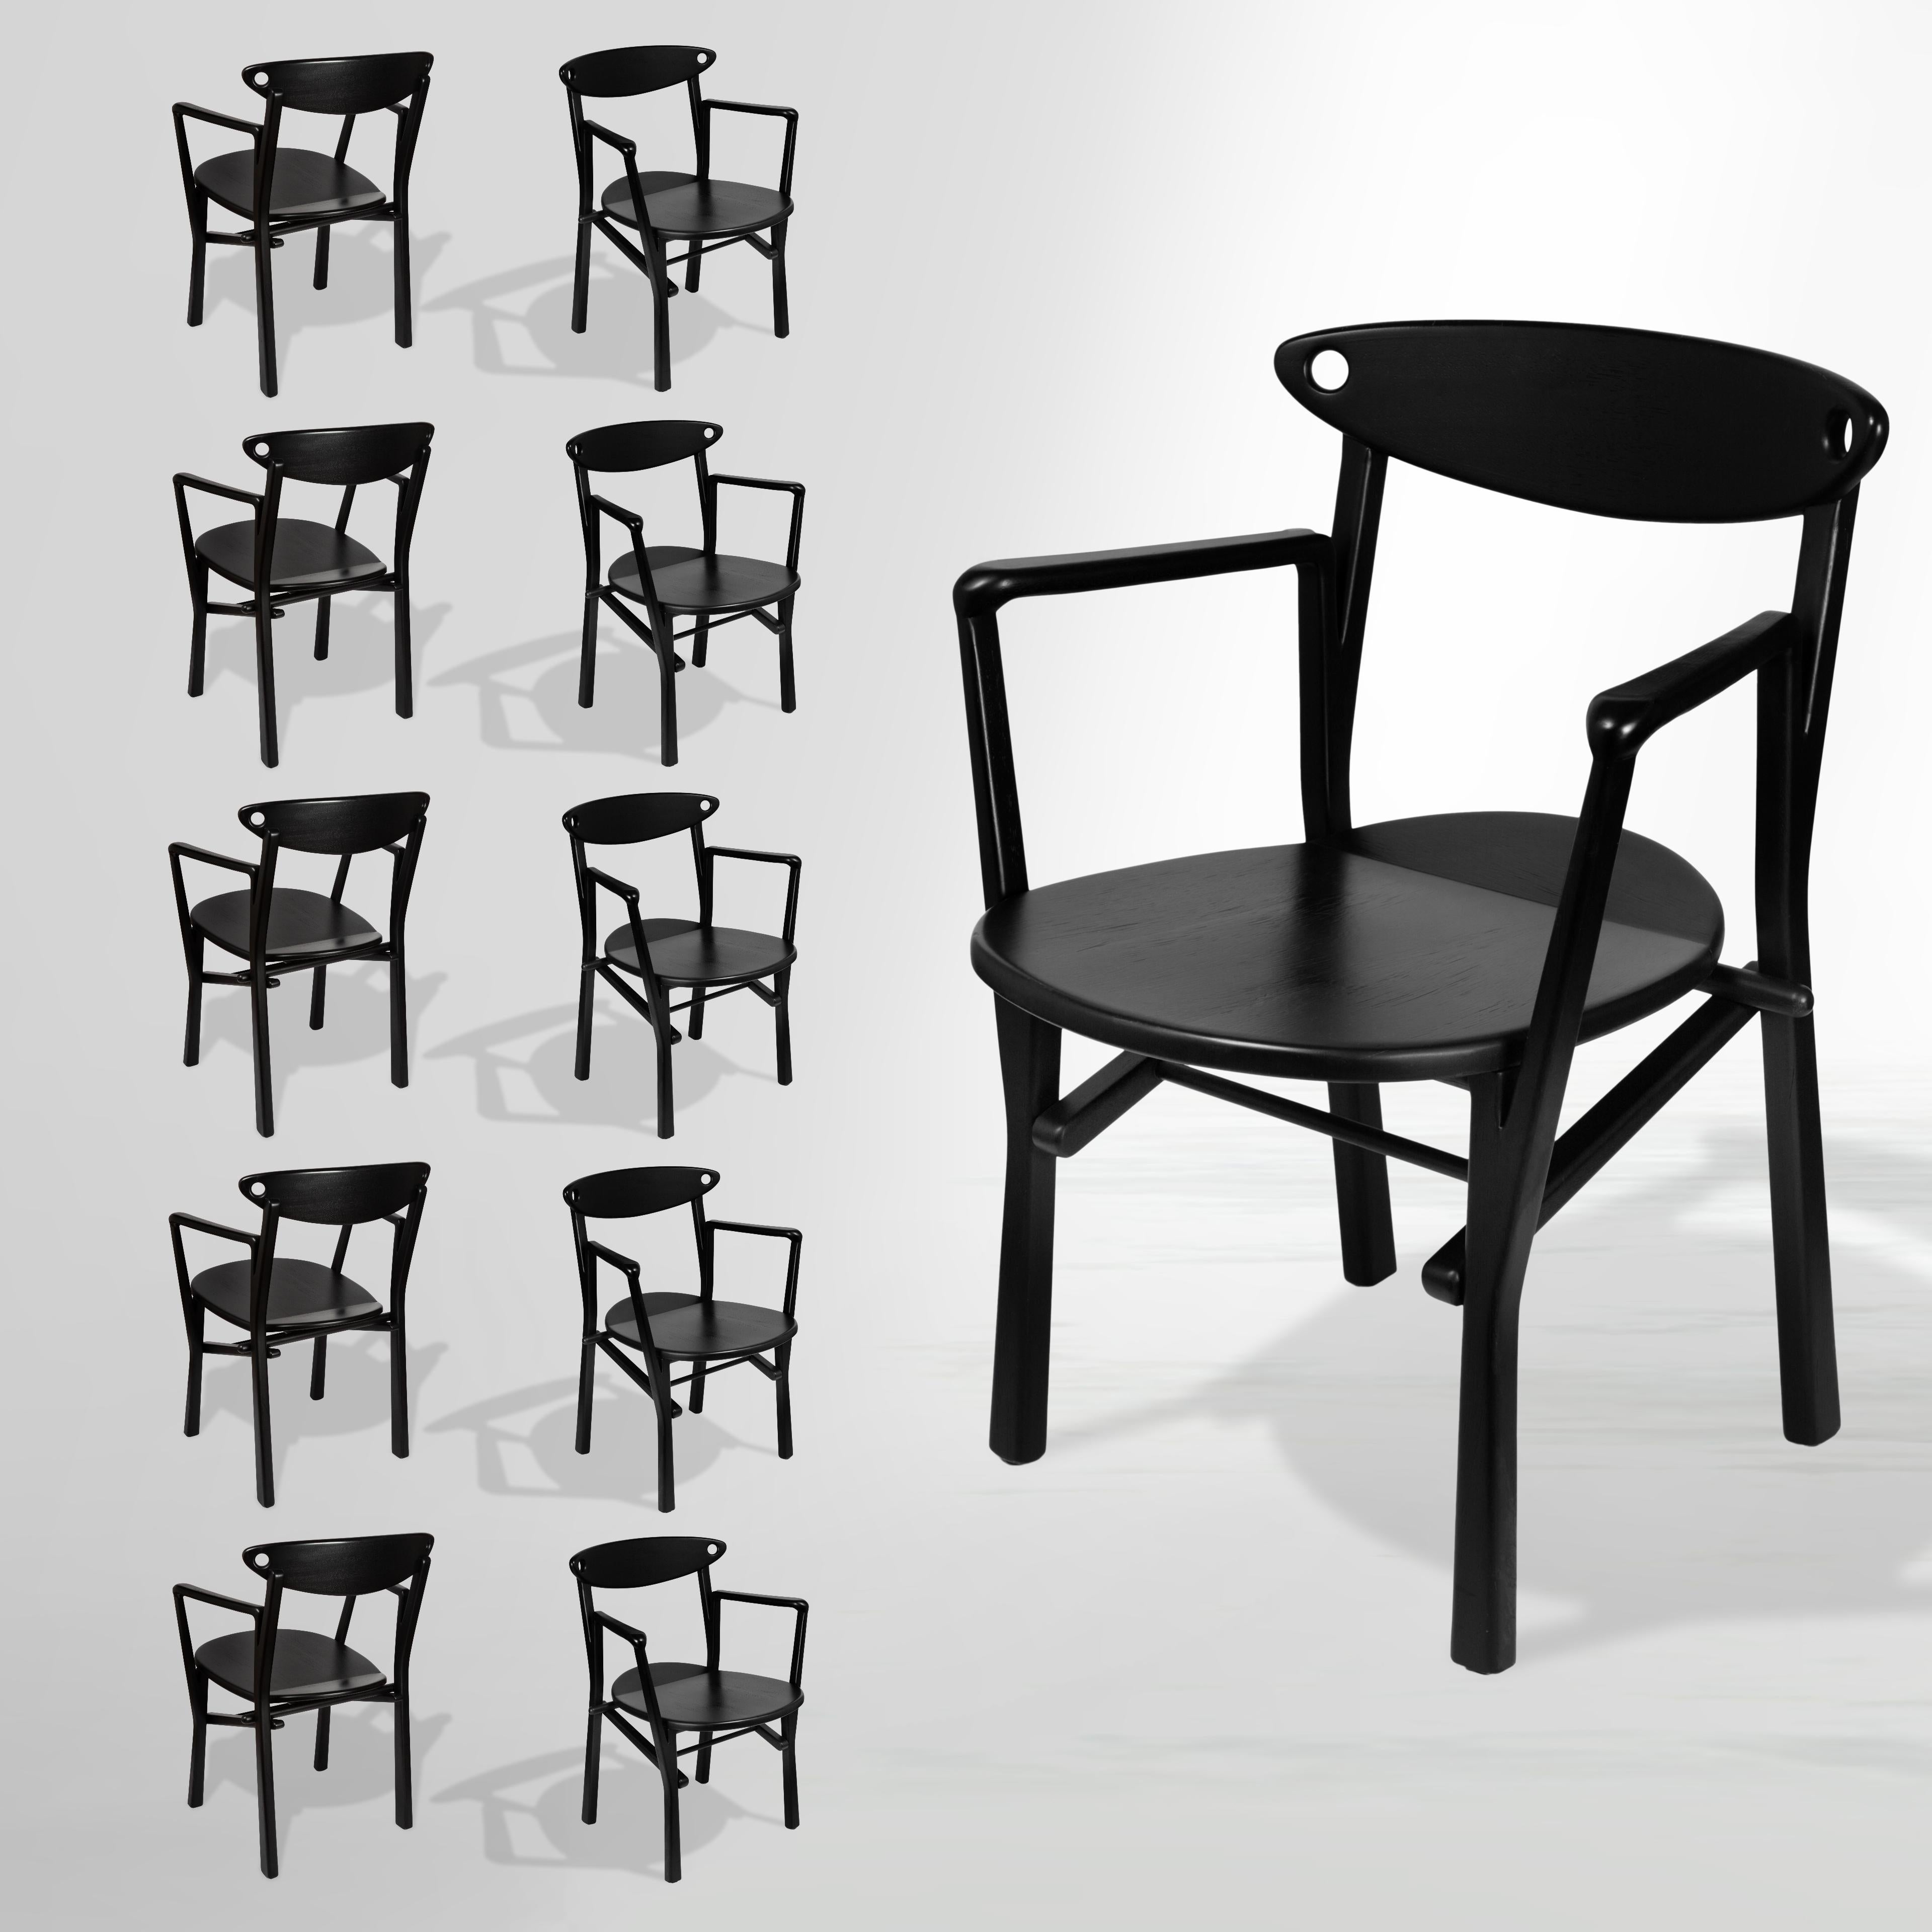 Brazilian Set of 10 Dinner Chairs Laje in Ebony Finish Wood For Sale